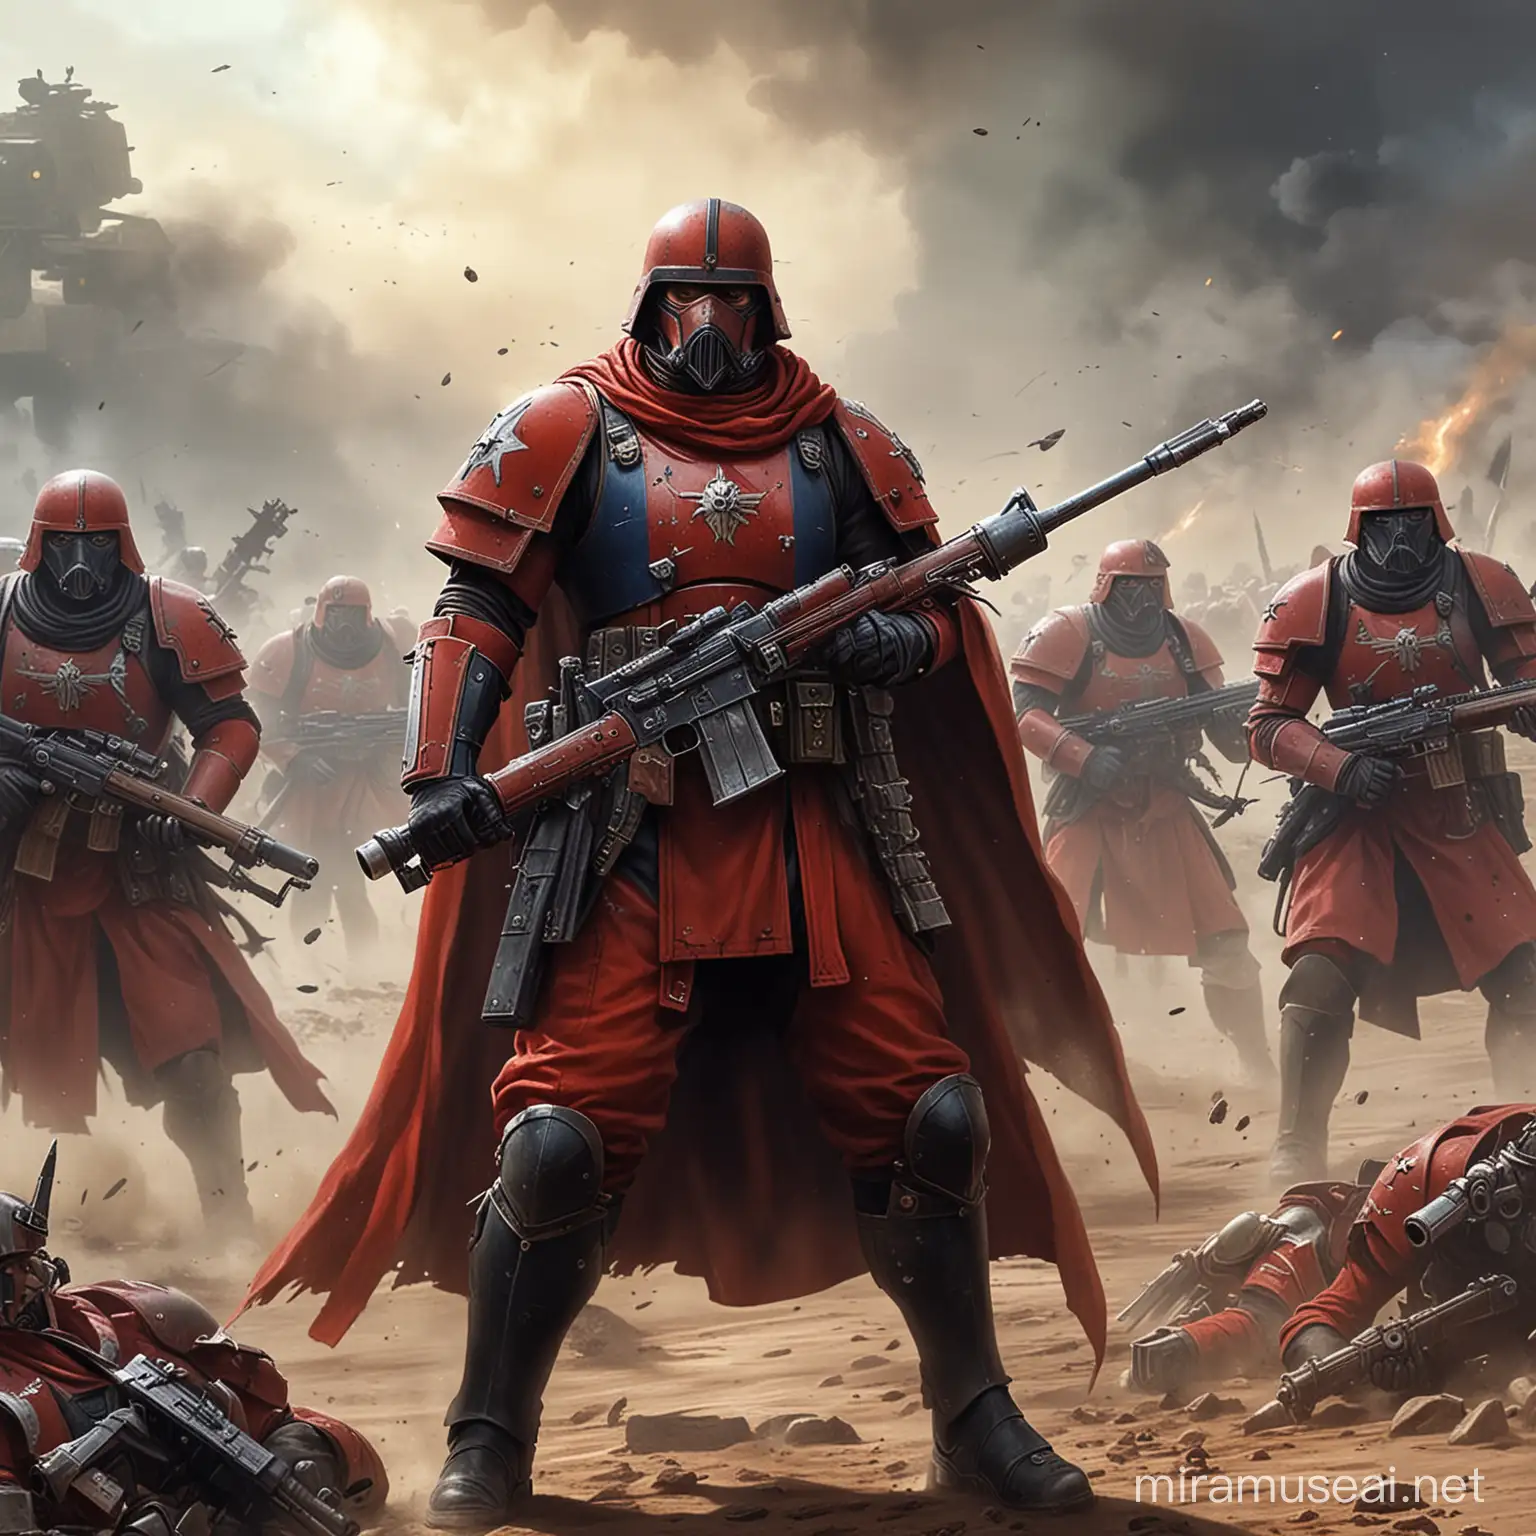 Warhammer 40K, Imperial guard  on the battfield ,  Fighting 

